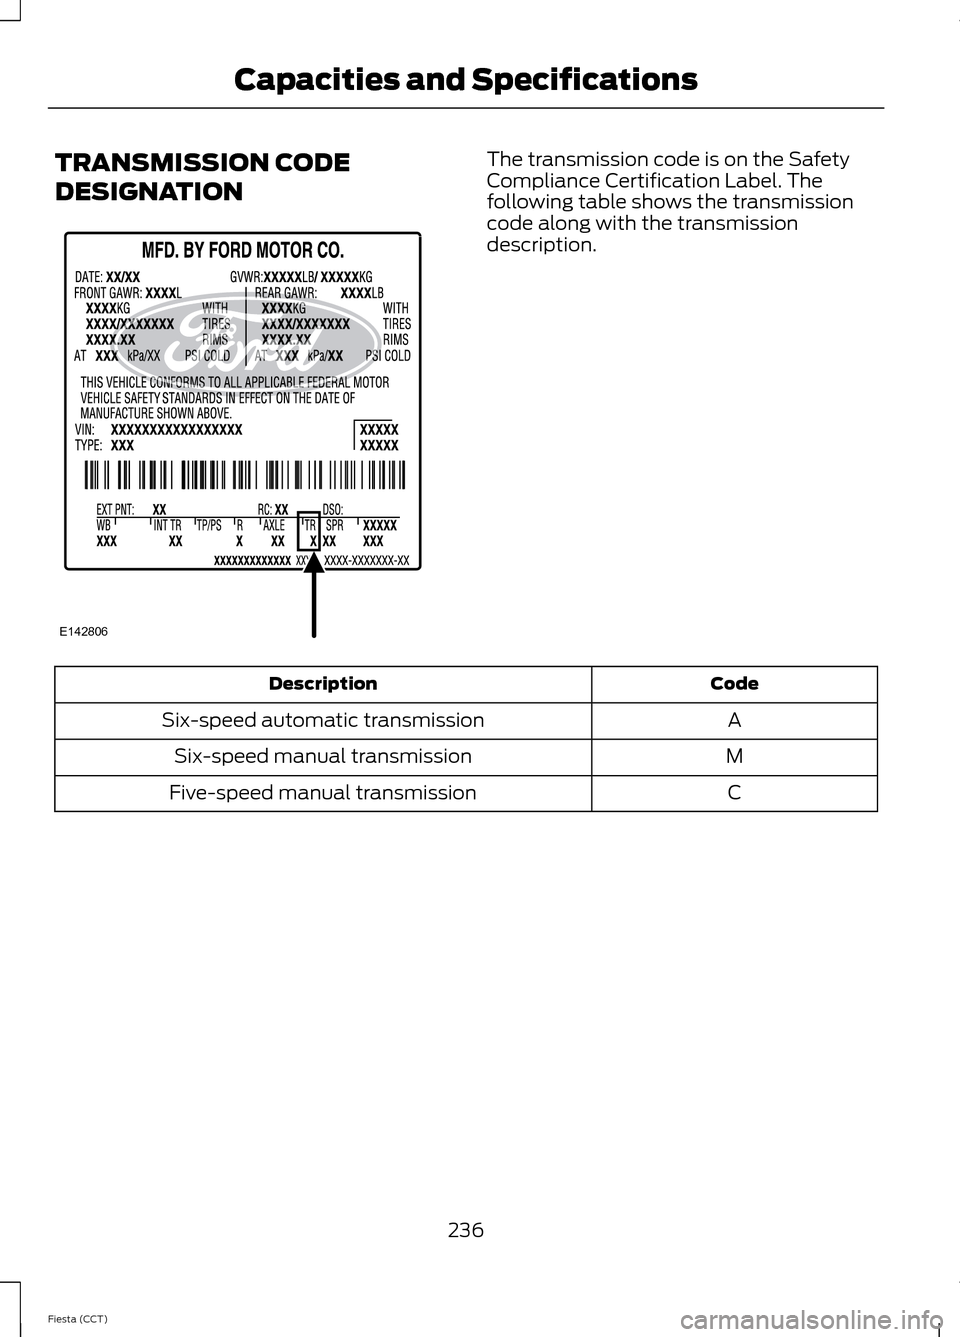 FORD FIESTA 2014 6.G Owners Manual TRANSMISSION CODE
DESIGNATION The transmission code is on the Safety
Compliance Certification Label. The
following table shows the transmission
code along with the transmission
description.
Code
Descr